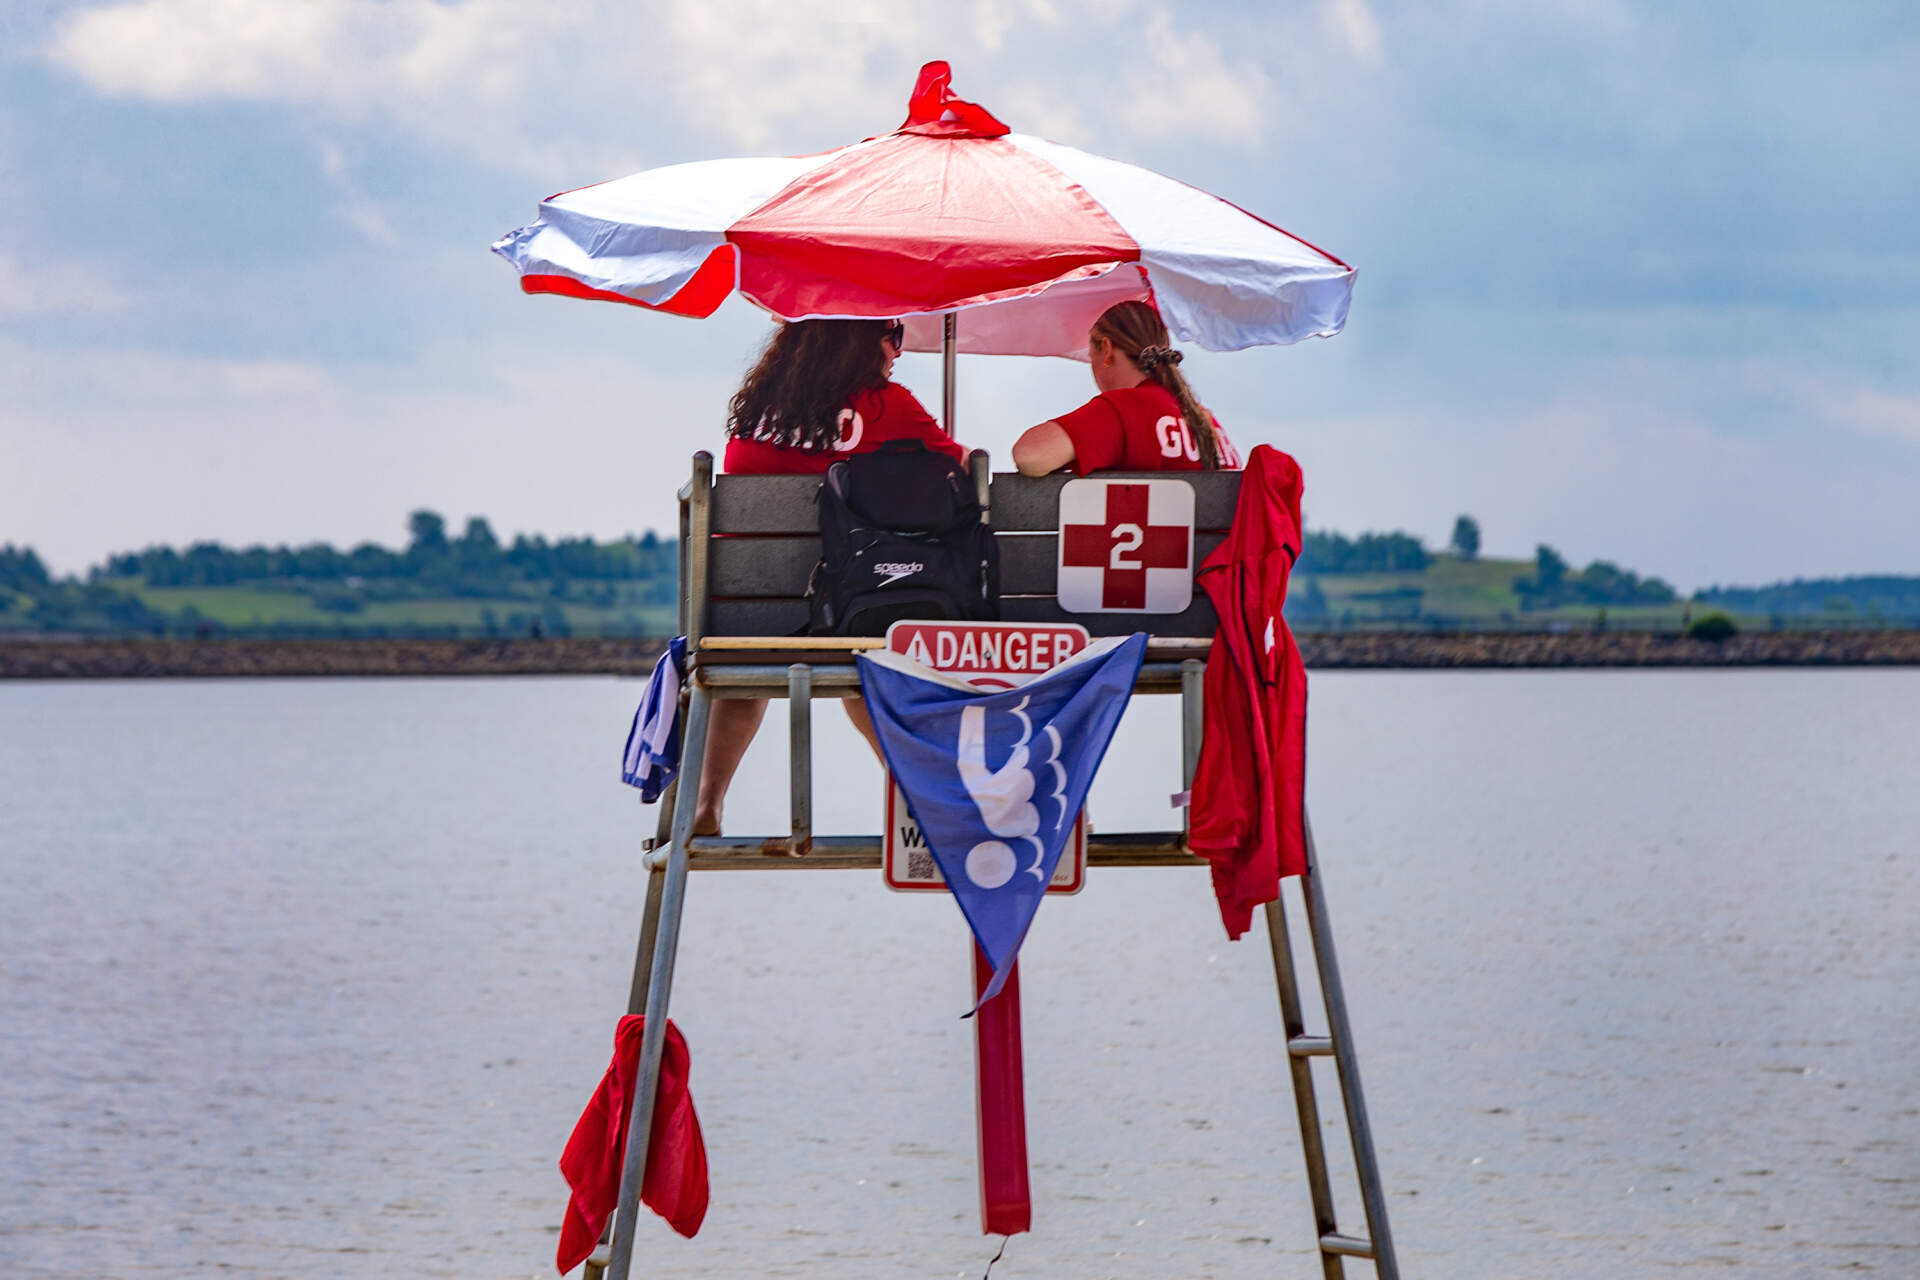 Two lifeguards chat on a lifeguard chair at Pleasure Bay Beach in South Boston. (Jesse Costa/WBUR)